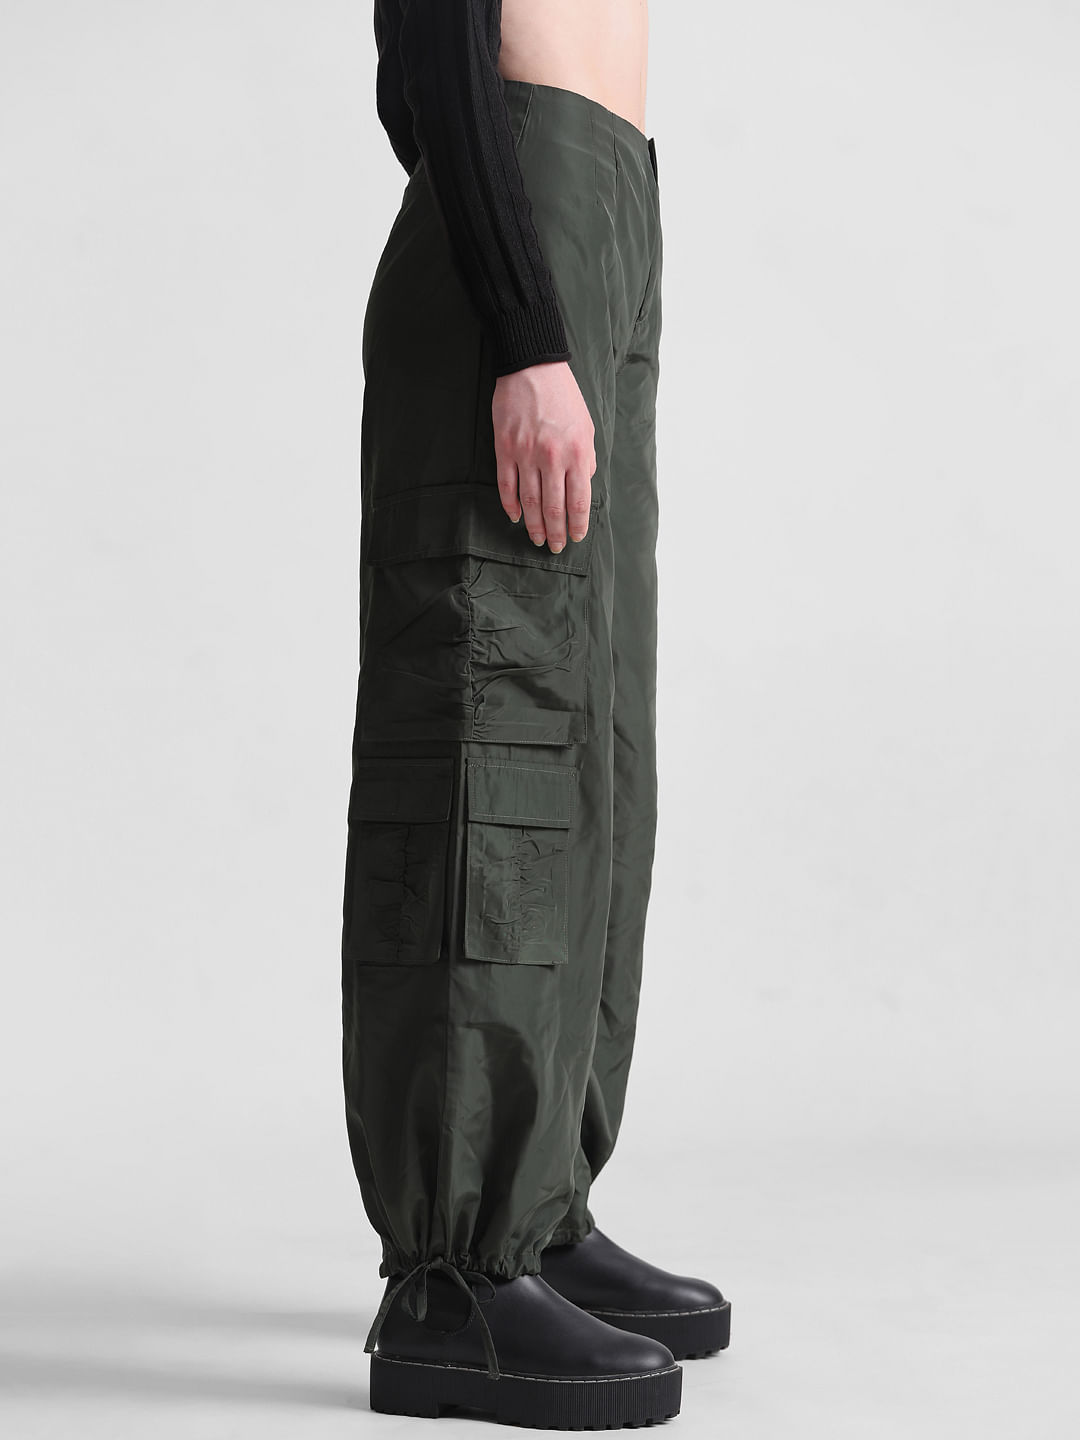 ROTHCO Tactical BDU Olive Cargo Pants  Rothco Cargo pants Battle dress